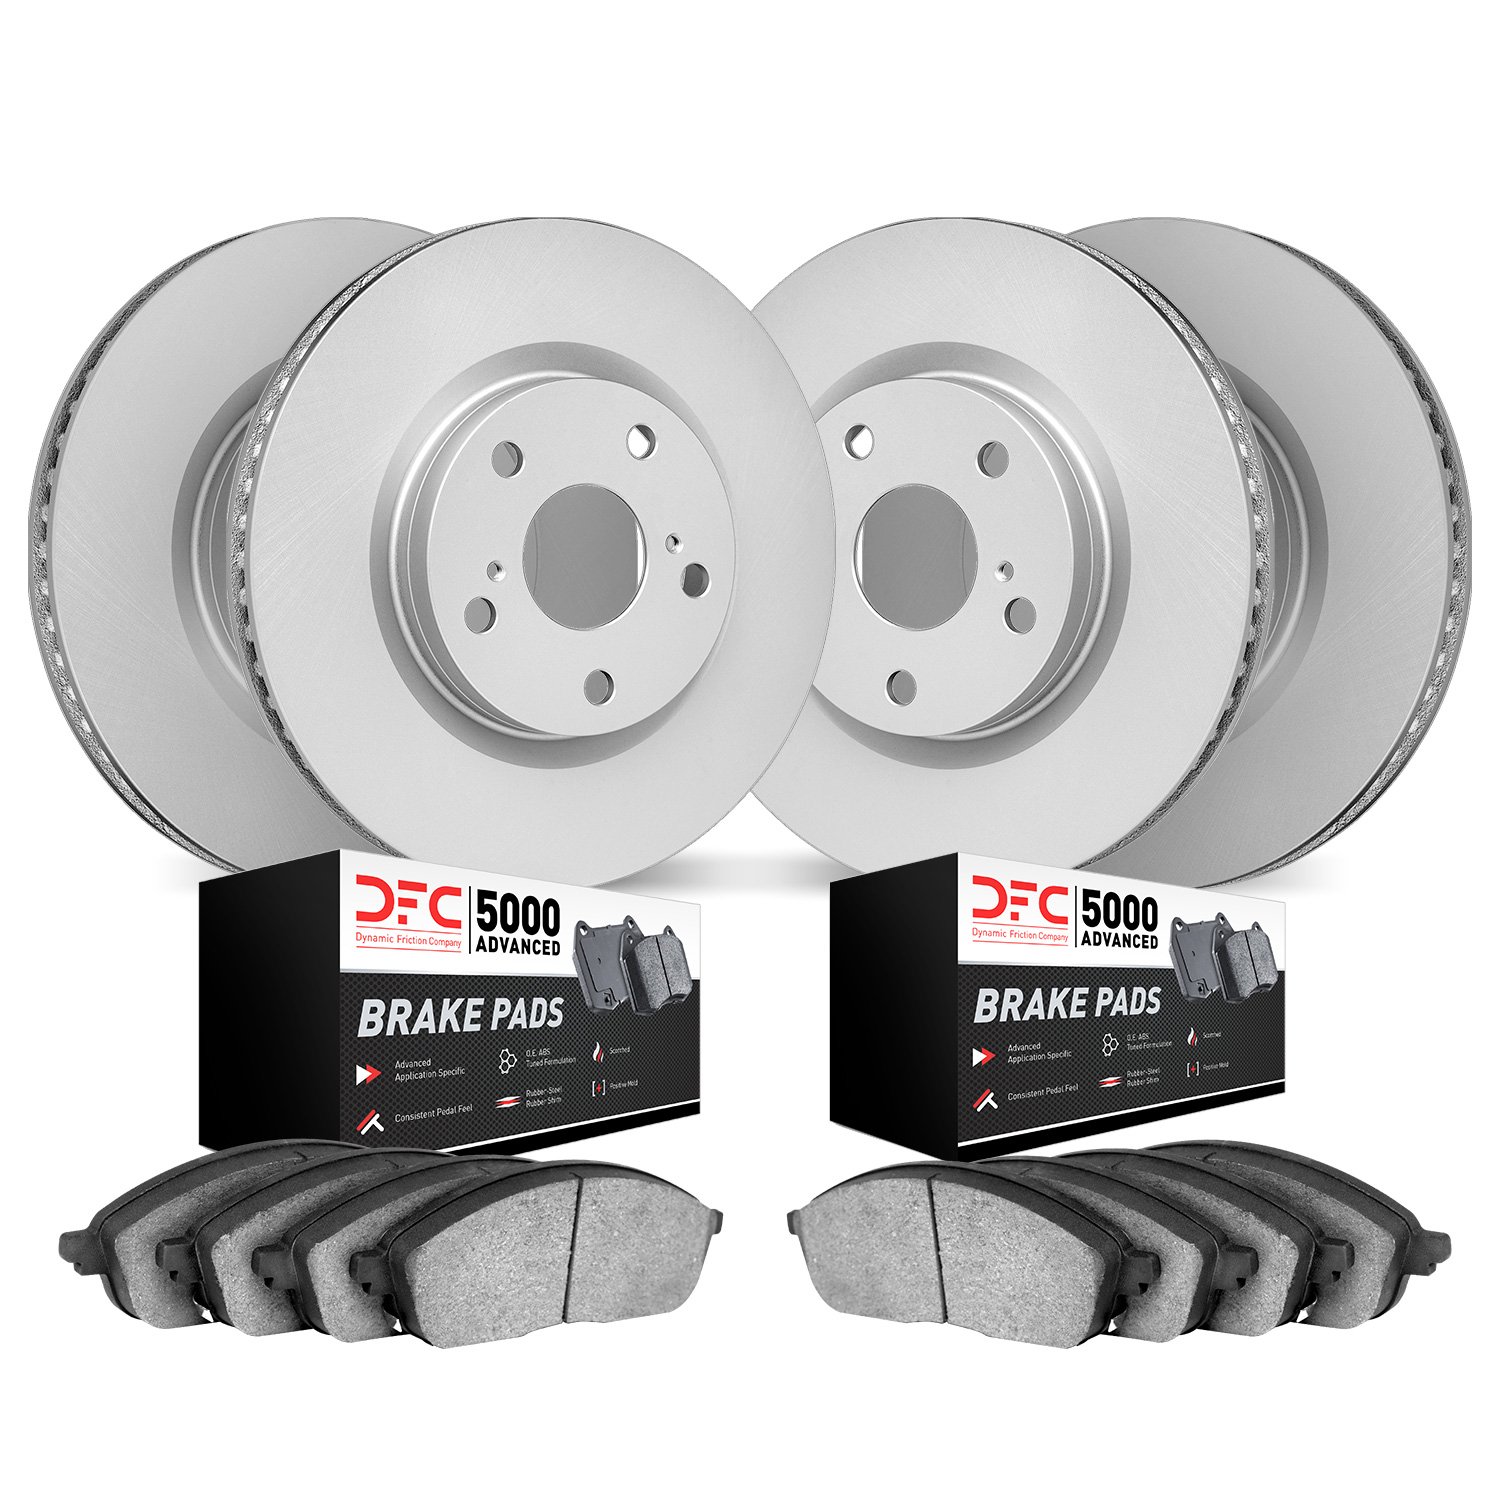 4504-65003 Geospec Brake Rotors w/5000 Advanced Brake Pads Kit, 2008-2011 GM, Position: Front and Rear